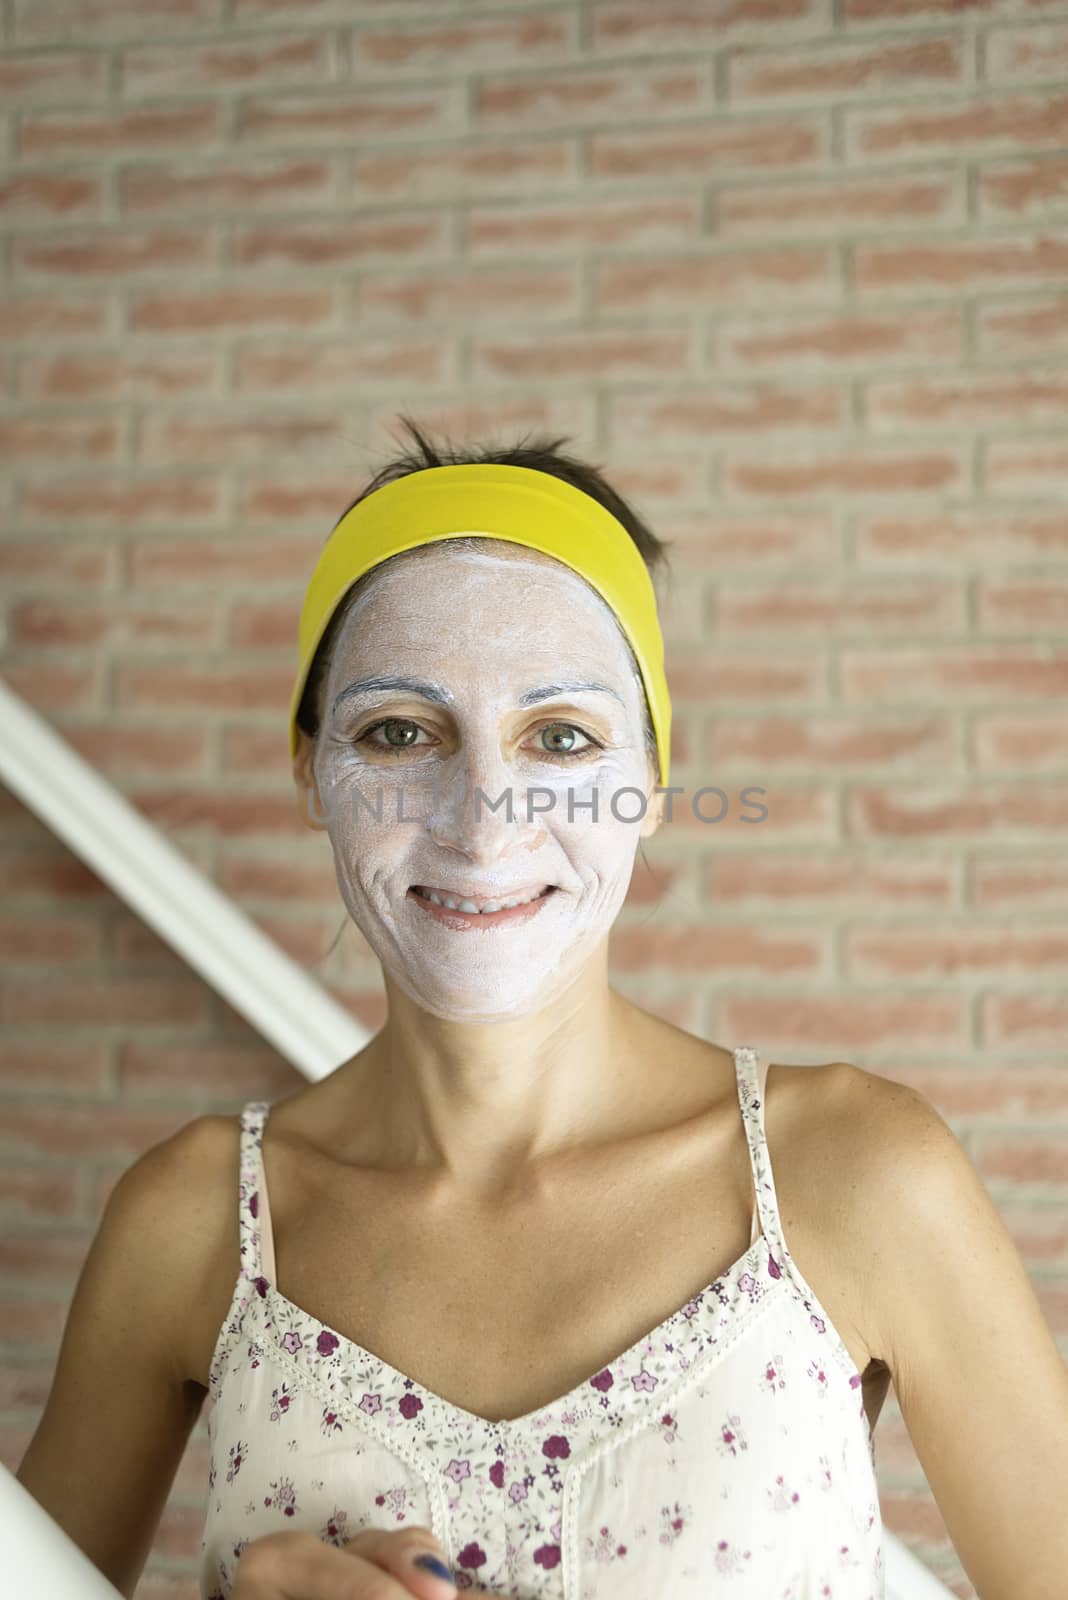 Relaxed woman applies mineral clay mask on face for rejuvenation, has headband on head